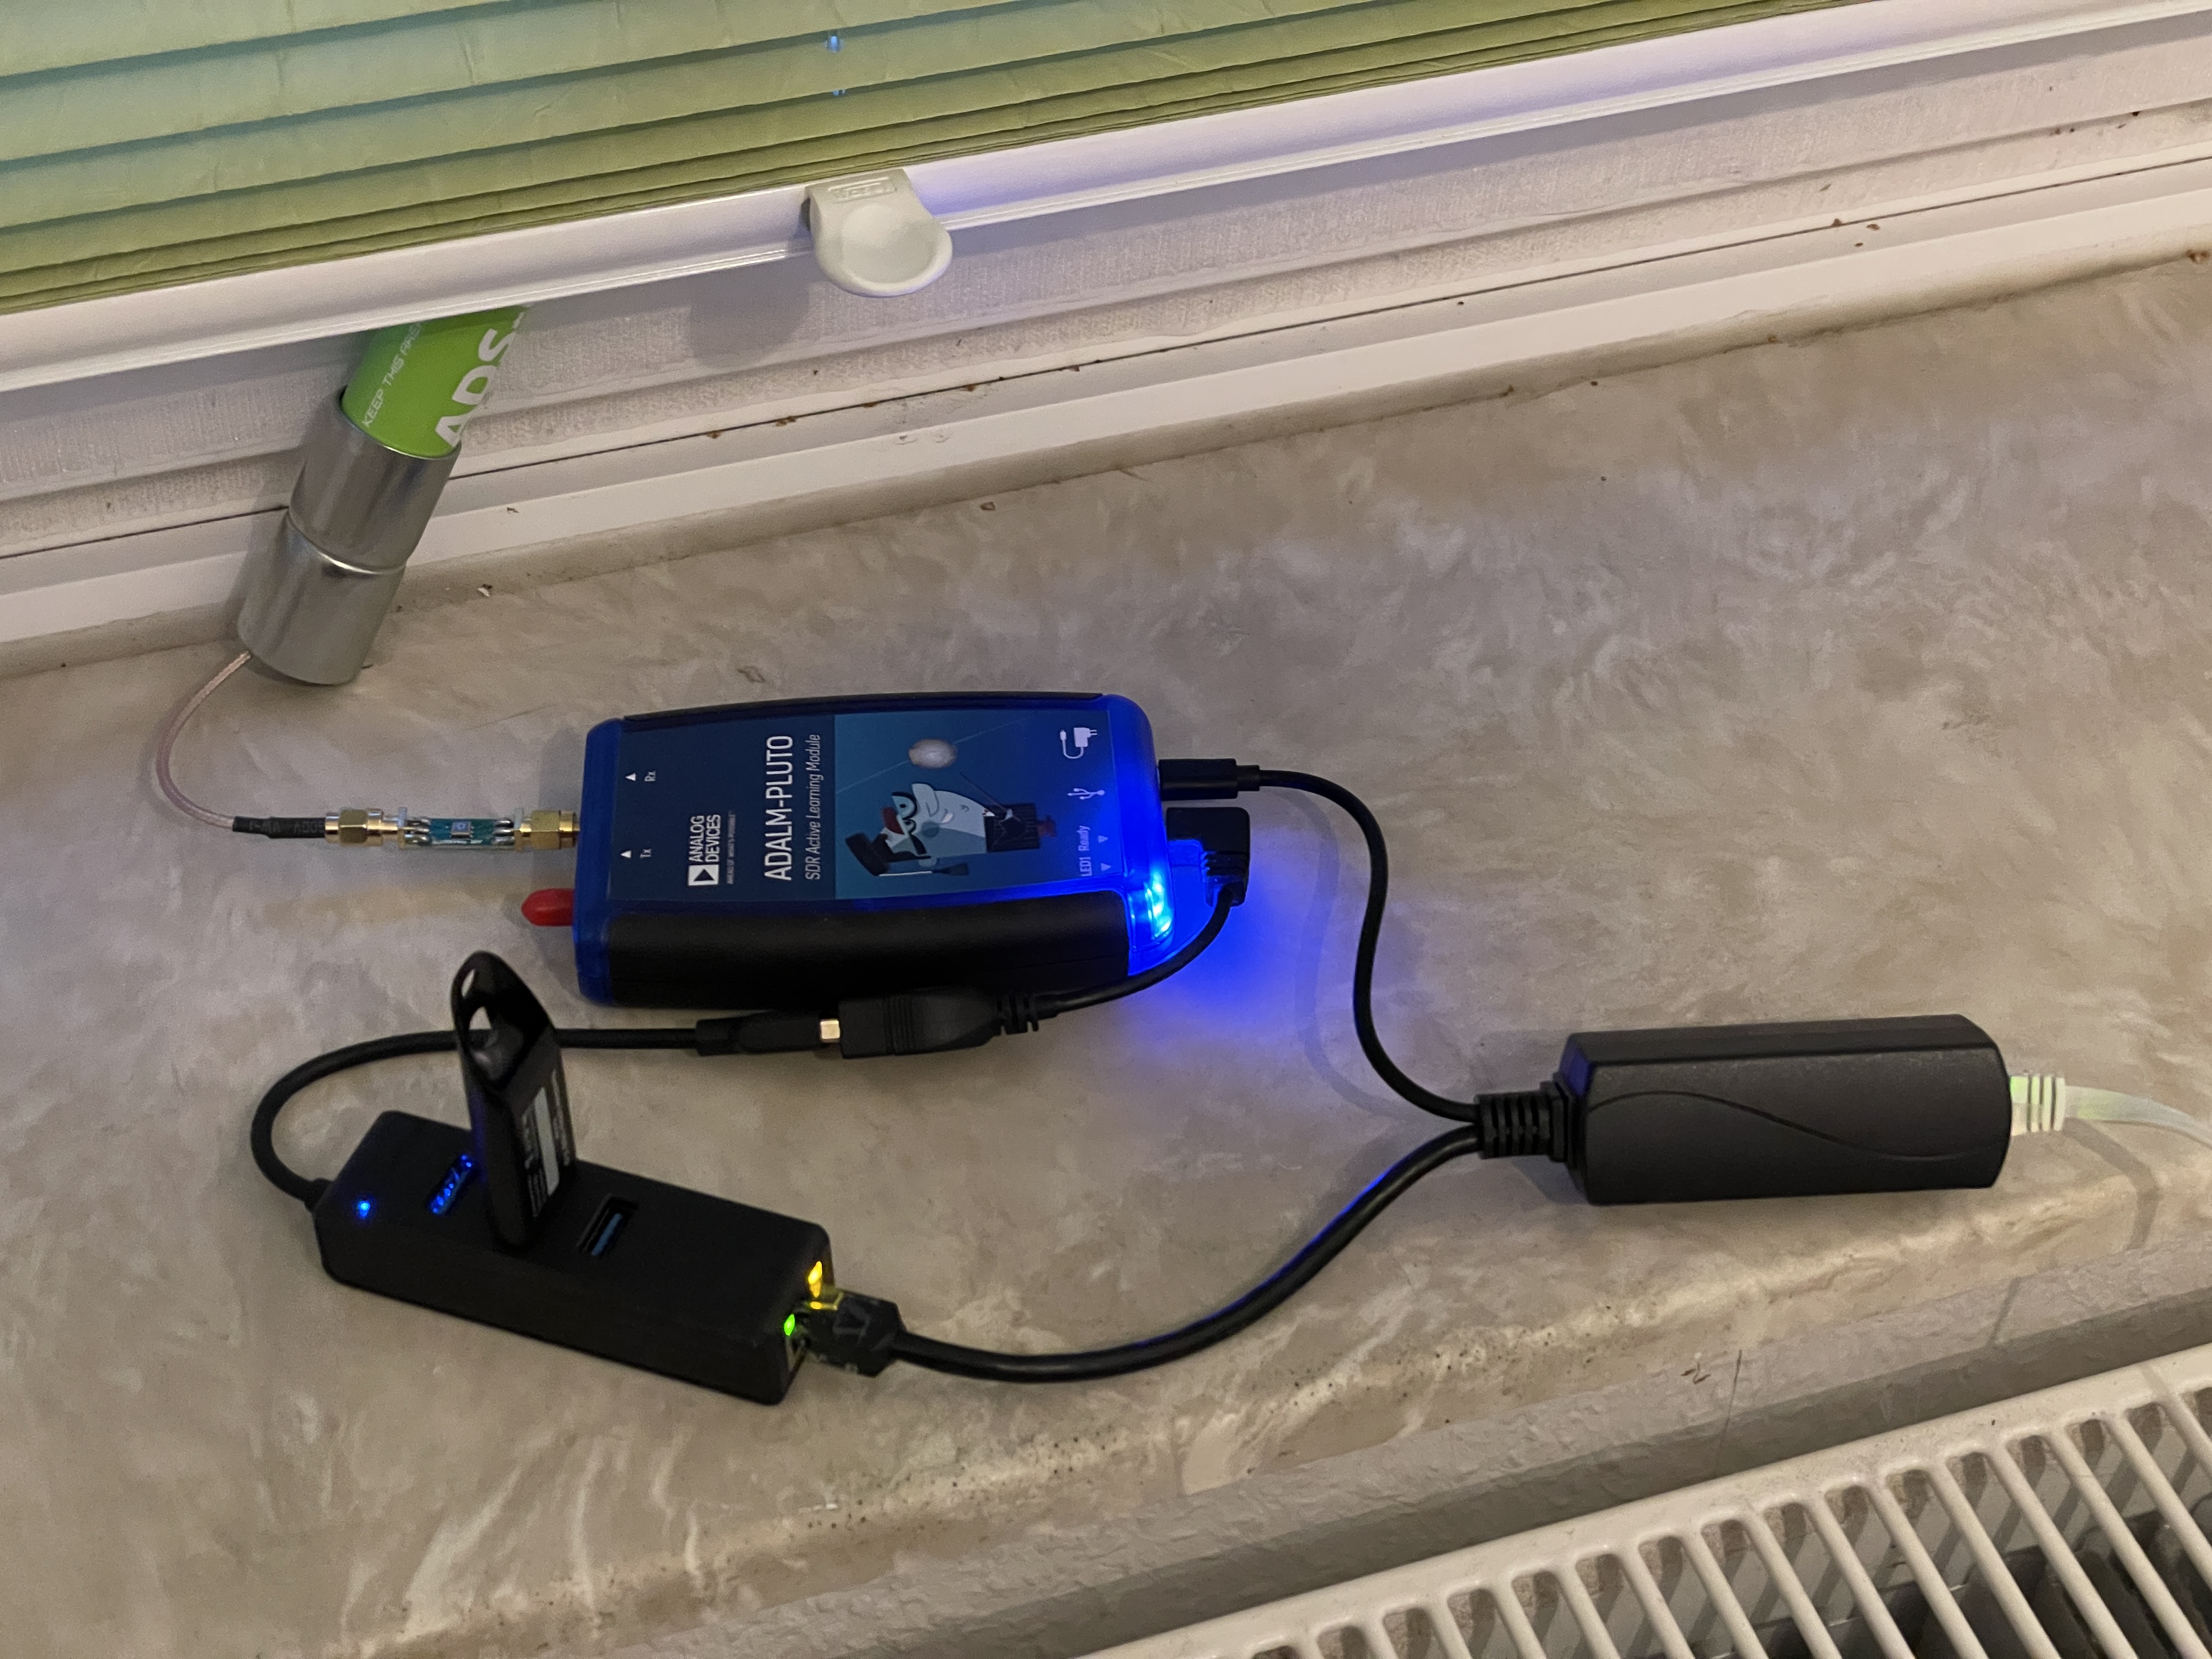 Setup on a windowsill, PlutoSDR with external ADSB antenna, 1090 MHz band pass filter, PoE-extractor and USB hub/USB ethernet card combo